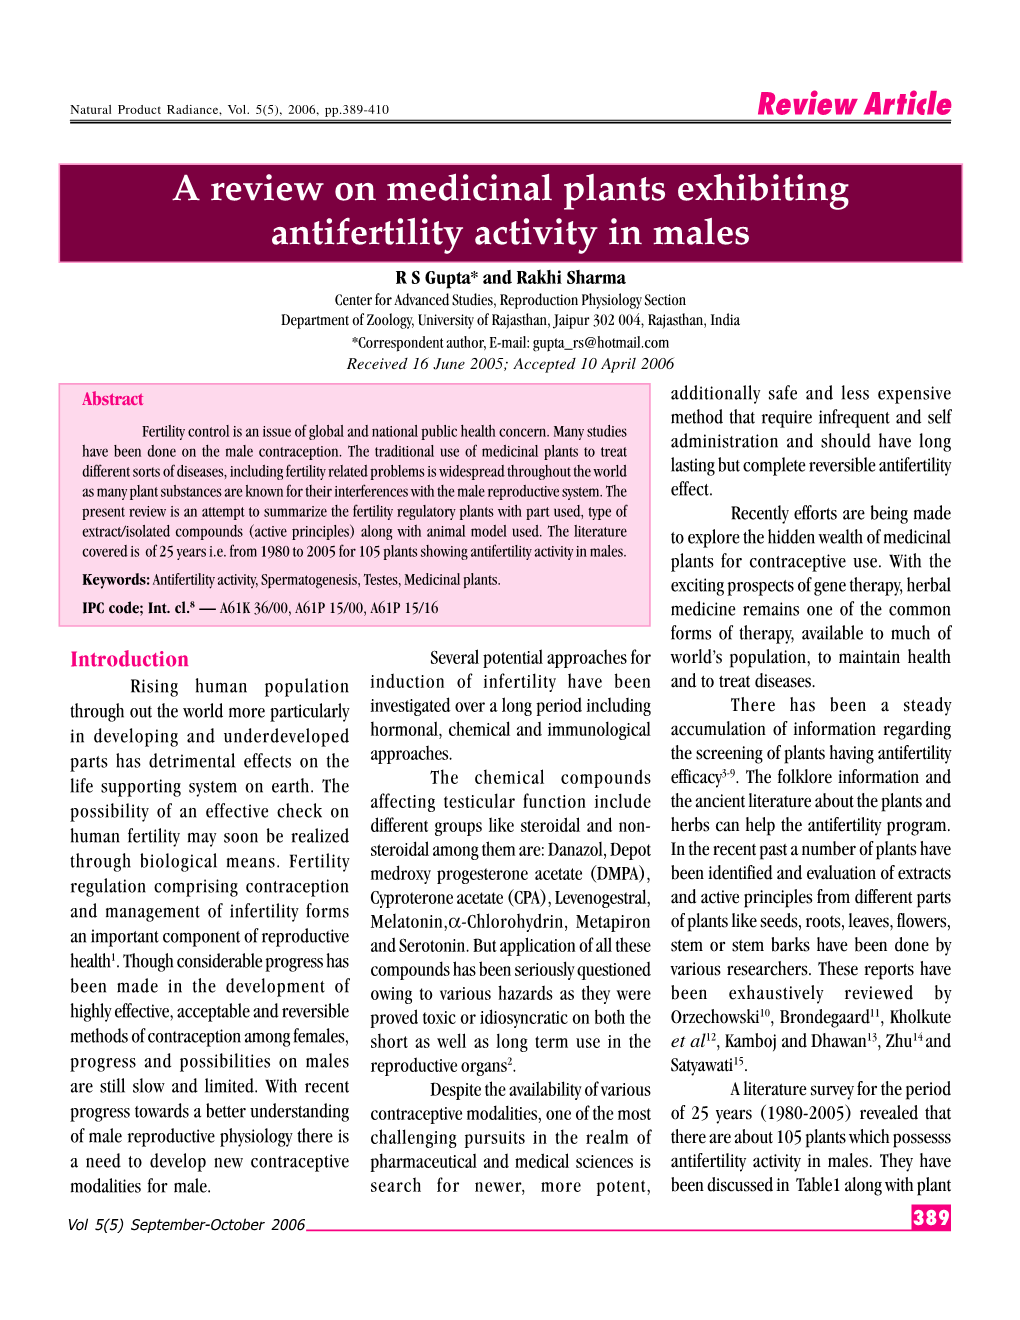 A Review on Medicinal Plants Exhibiting Antifertility Activity in Males